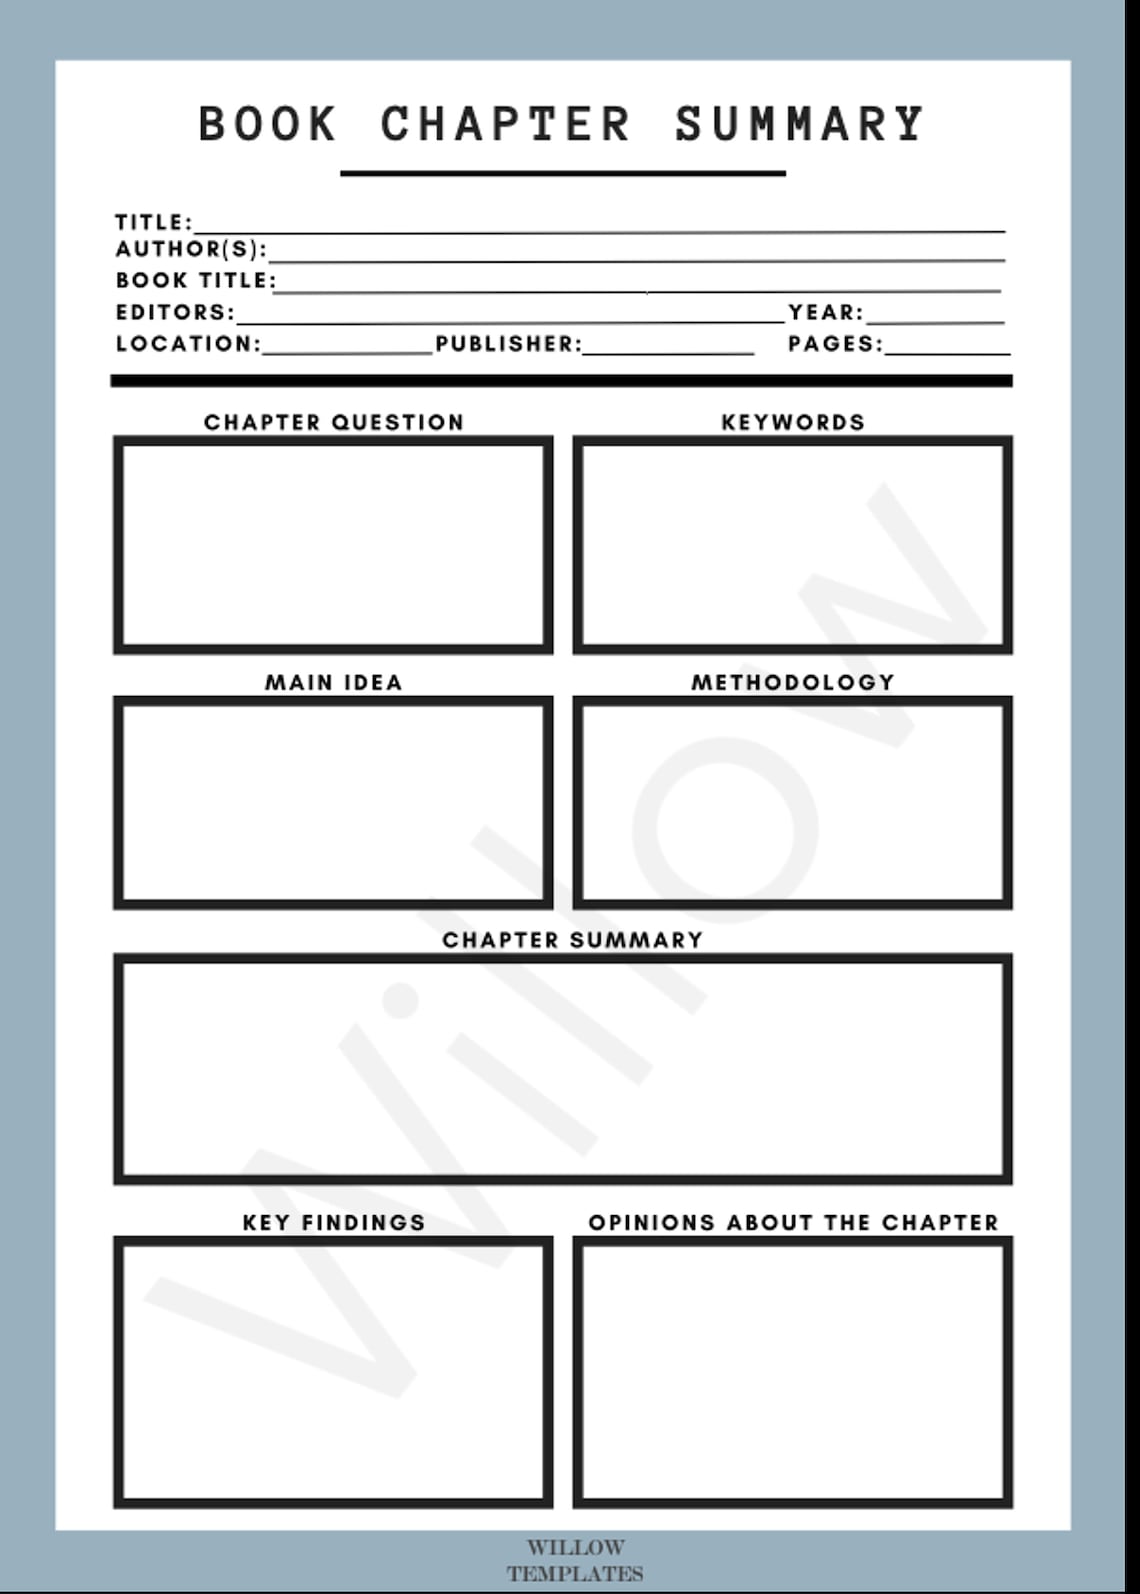 a4-book-chapter-summary-template-digital-printable-etsy